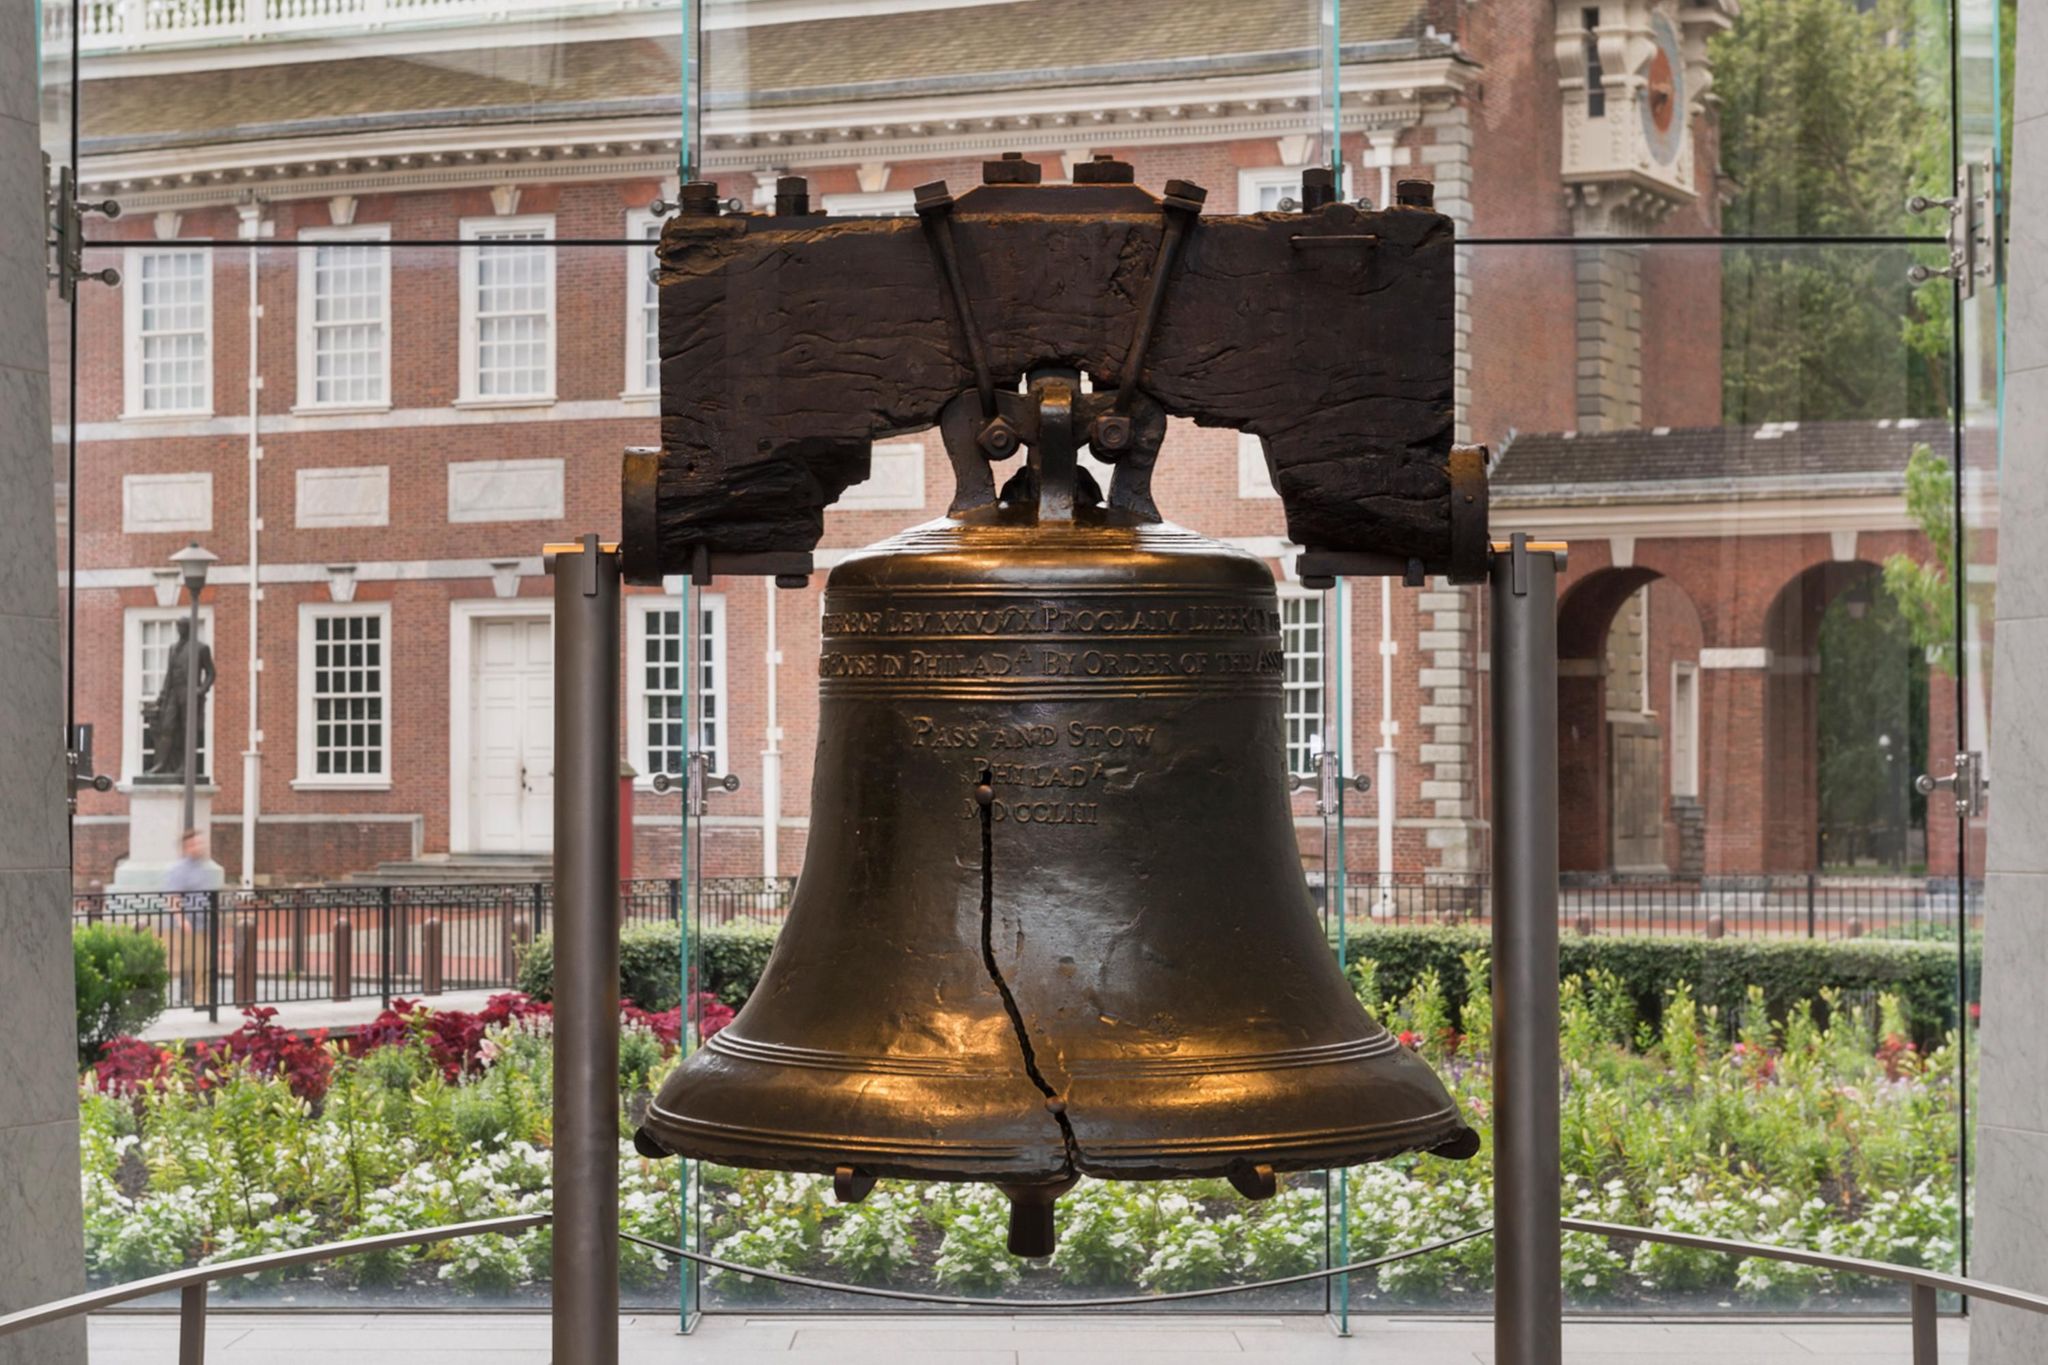 Recognizable for its crack, the Liberty Bell remains significant today for its message of liberty.